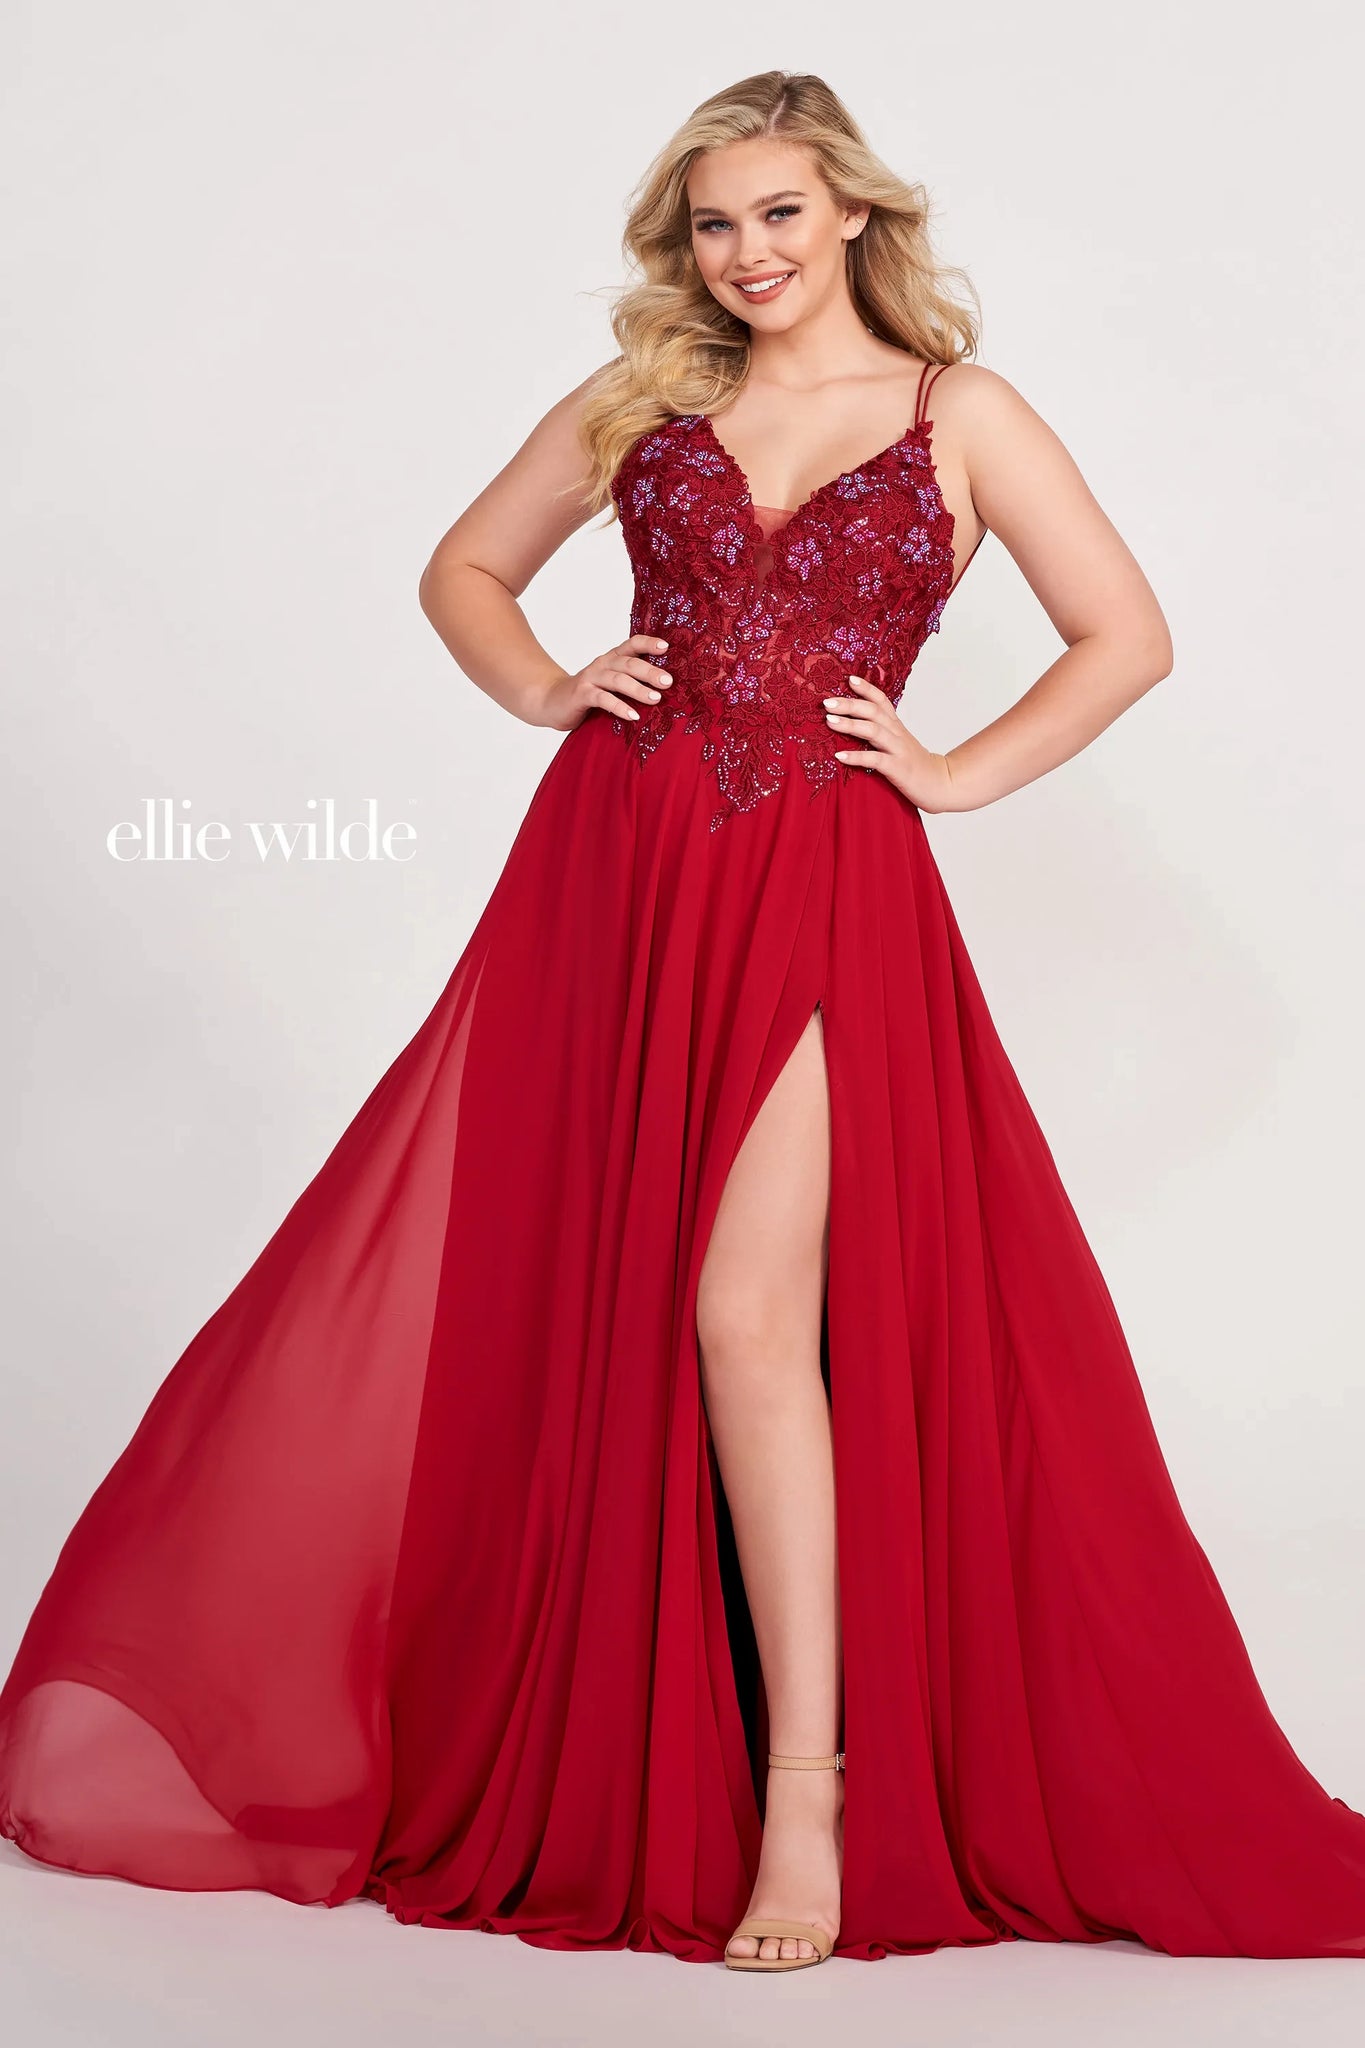 Looking for a show-stopping dress that will turn heads? Look no further than the Ellie Wilde EW34078. This gorgeous dress features intricate embroidered lace with three-dimensional flowers and stone accents. The flowing chiffon material is perfect for a night out on the town or a special event. You're sure to dazzle in this stunning dress!